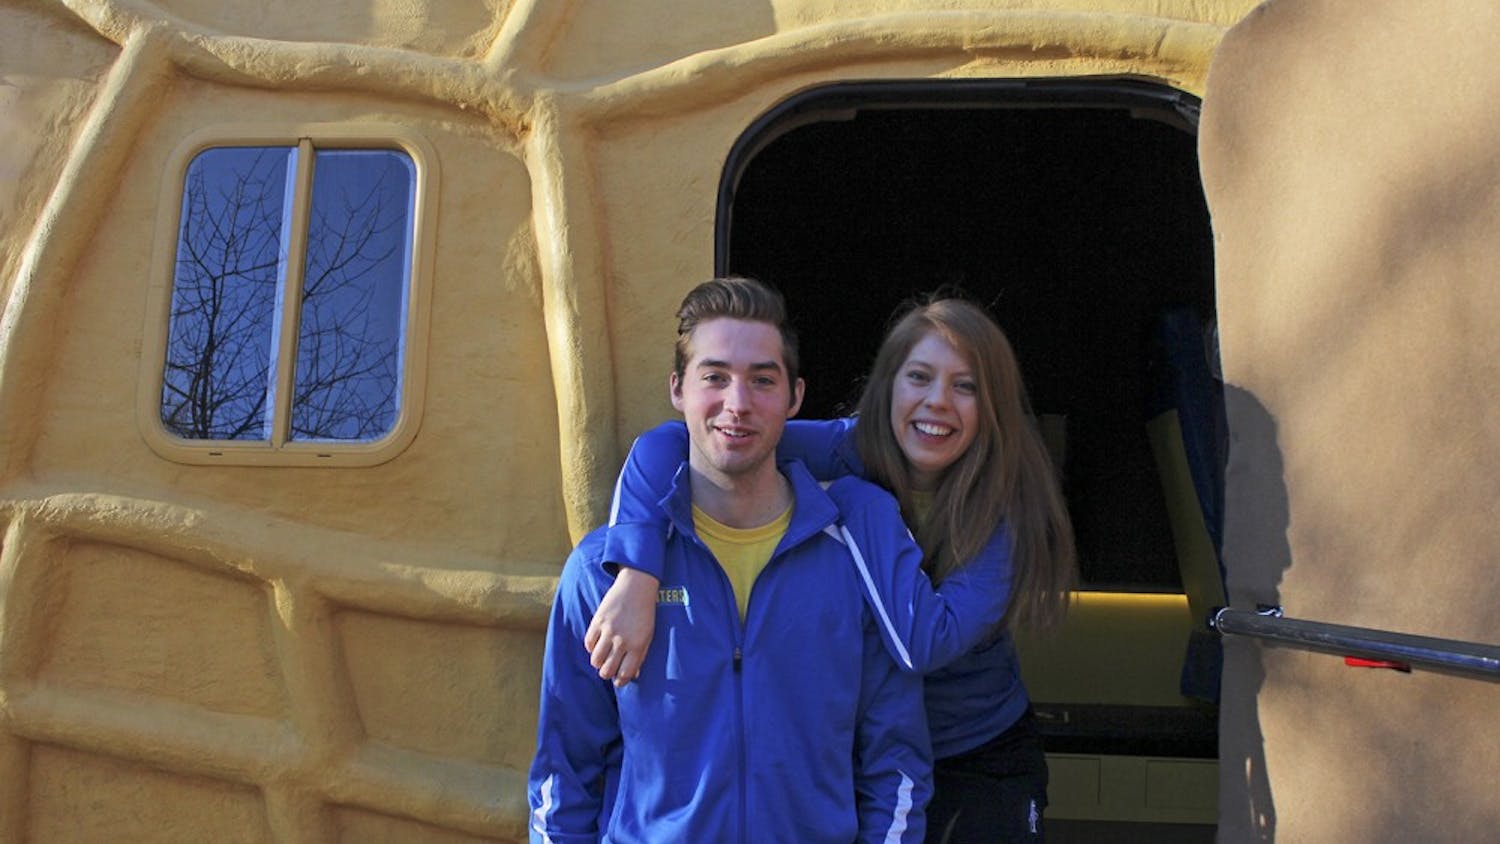 Planters representatives Alejandra Galindo and Dylan Eikes with their "nutmobile" on Saturday afternoon.